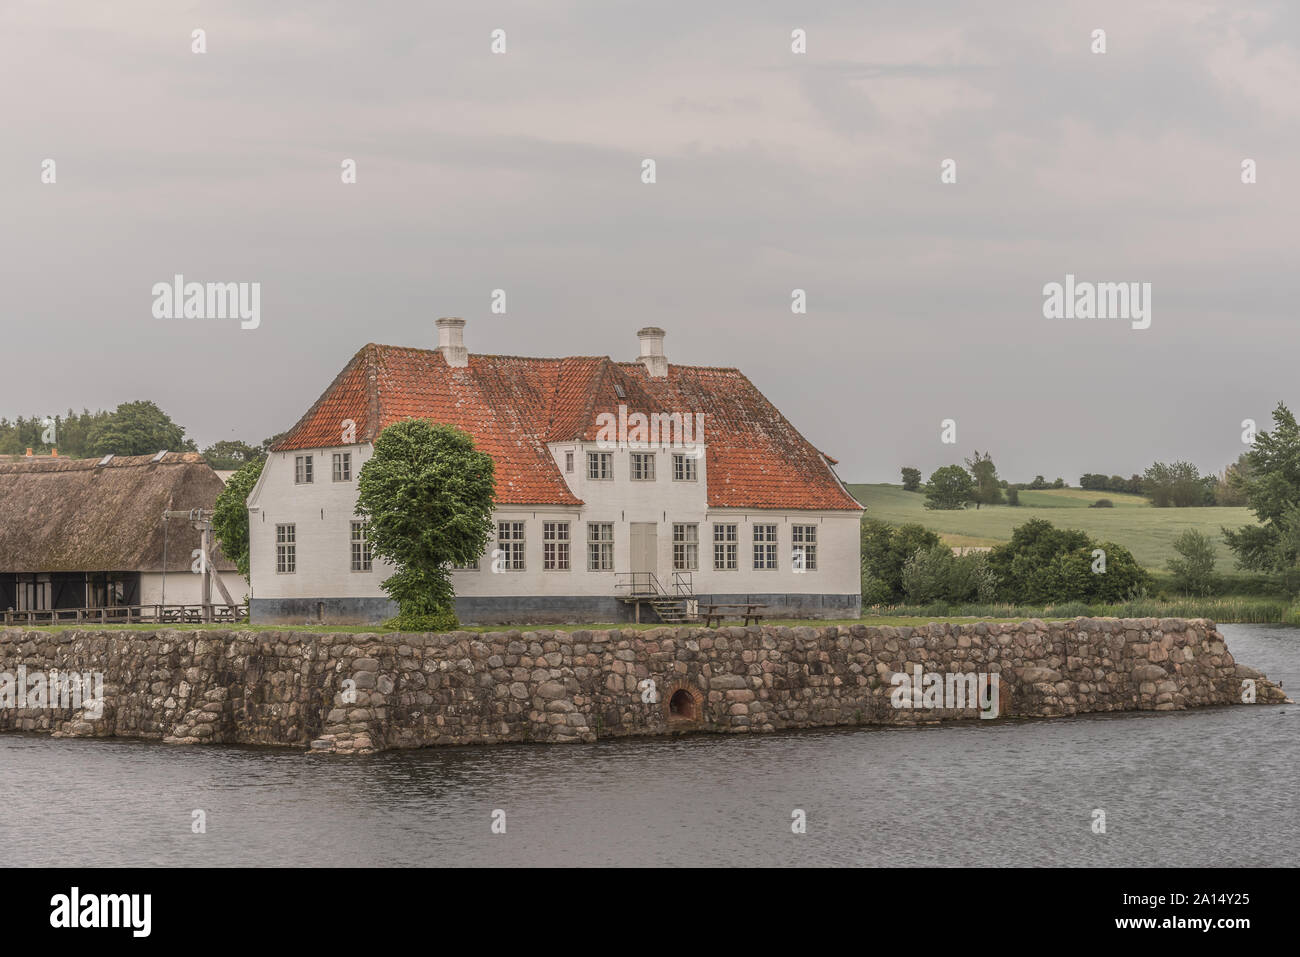 A danish mansion house, Søbygaard, surrounded by a moat, July 13, 2019 Stock Photo